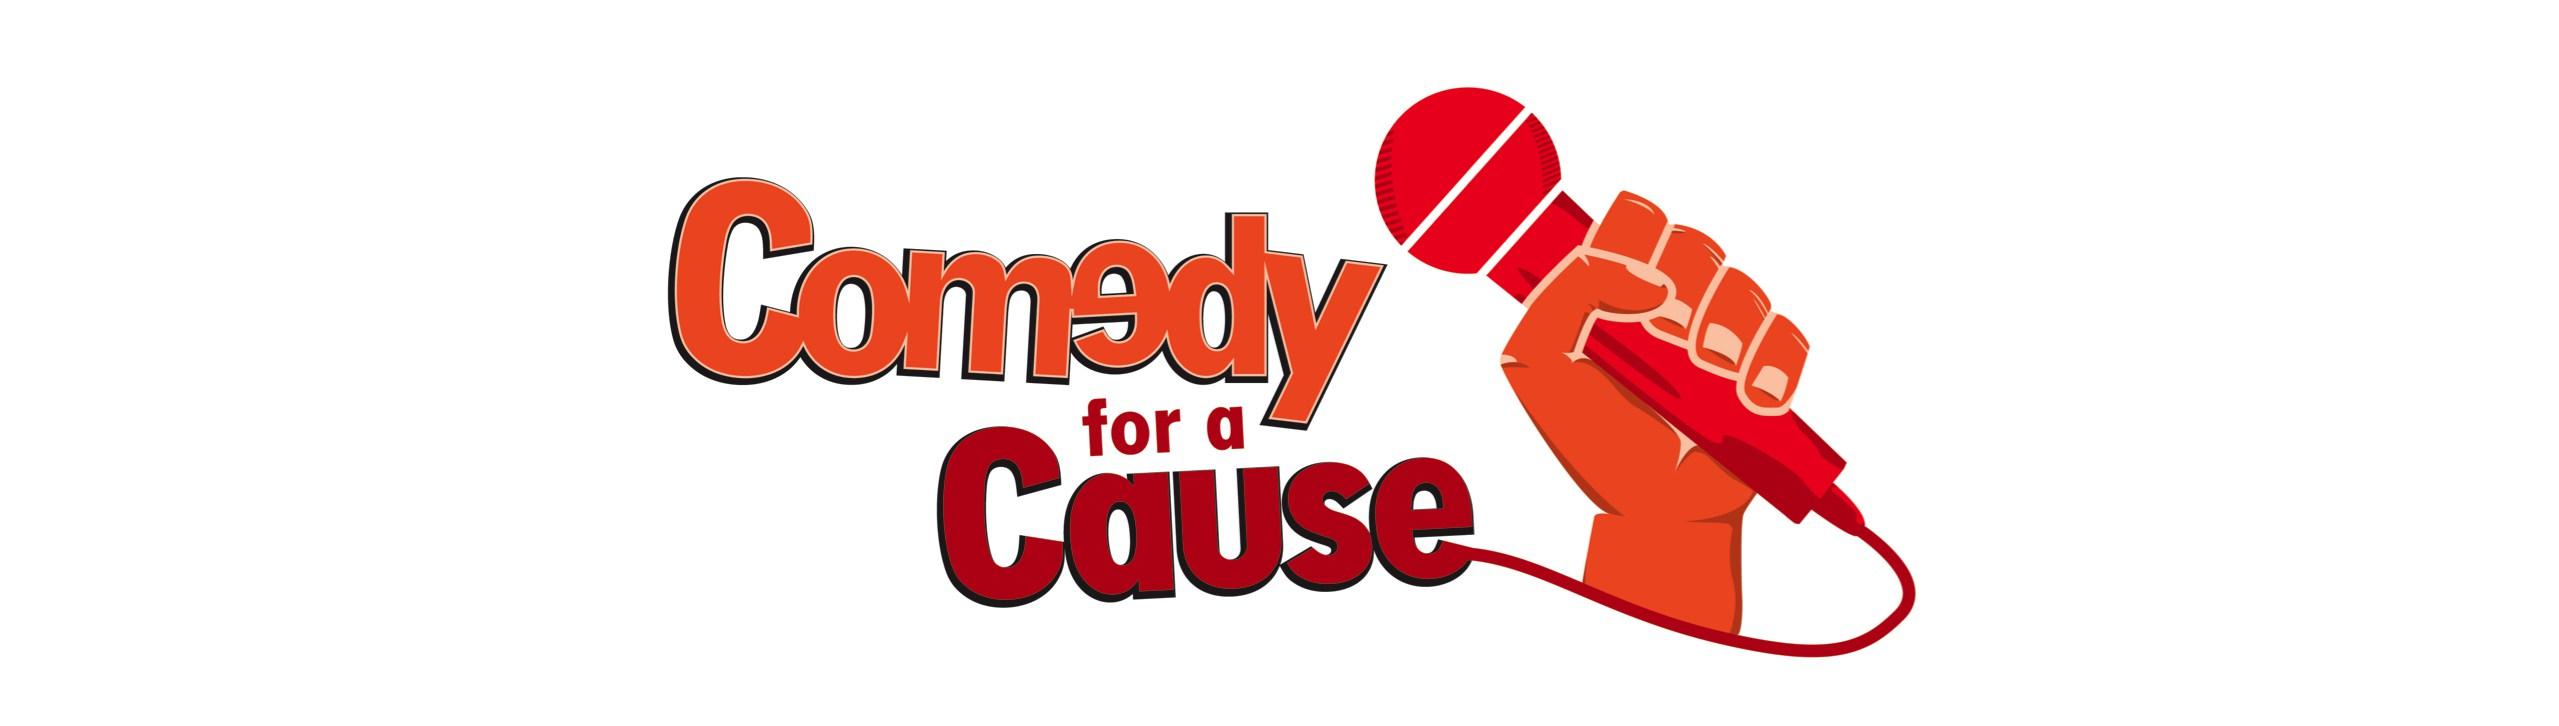 Beyond the Hurt Presents: Comedy for a Cause